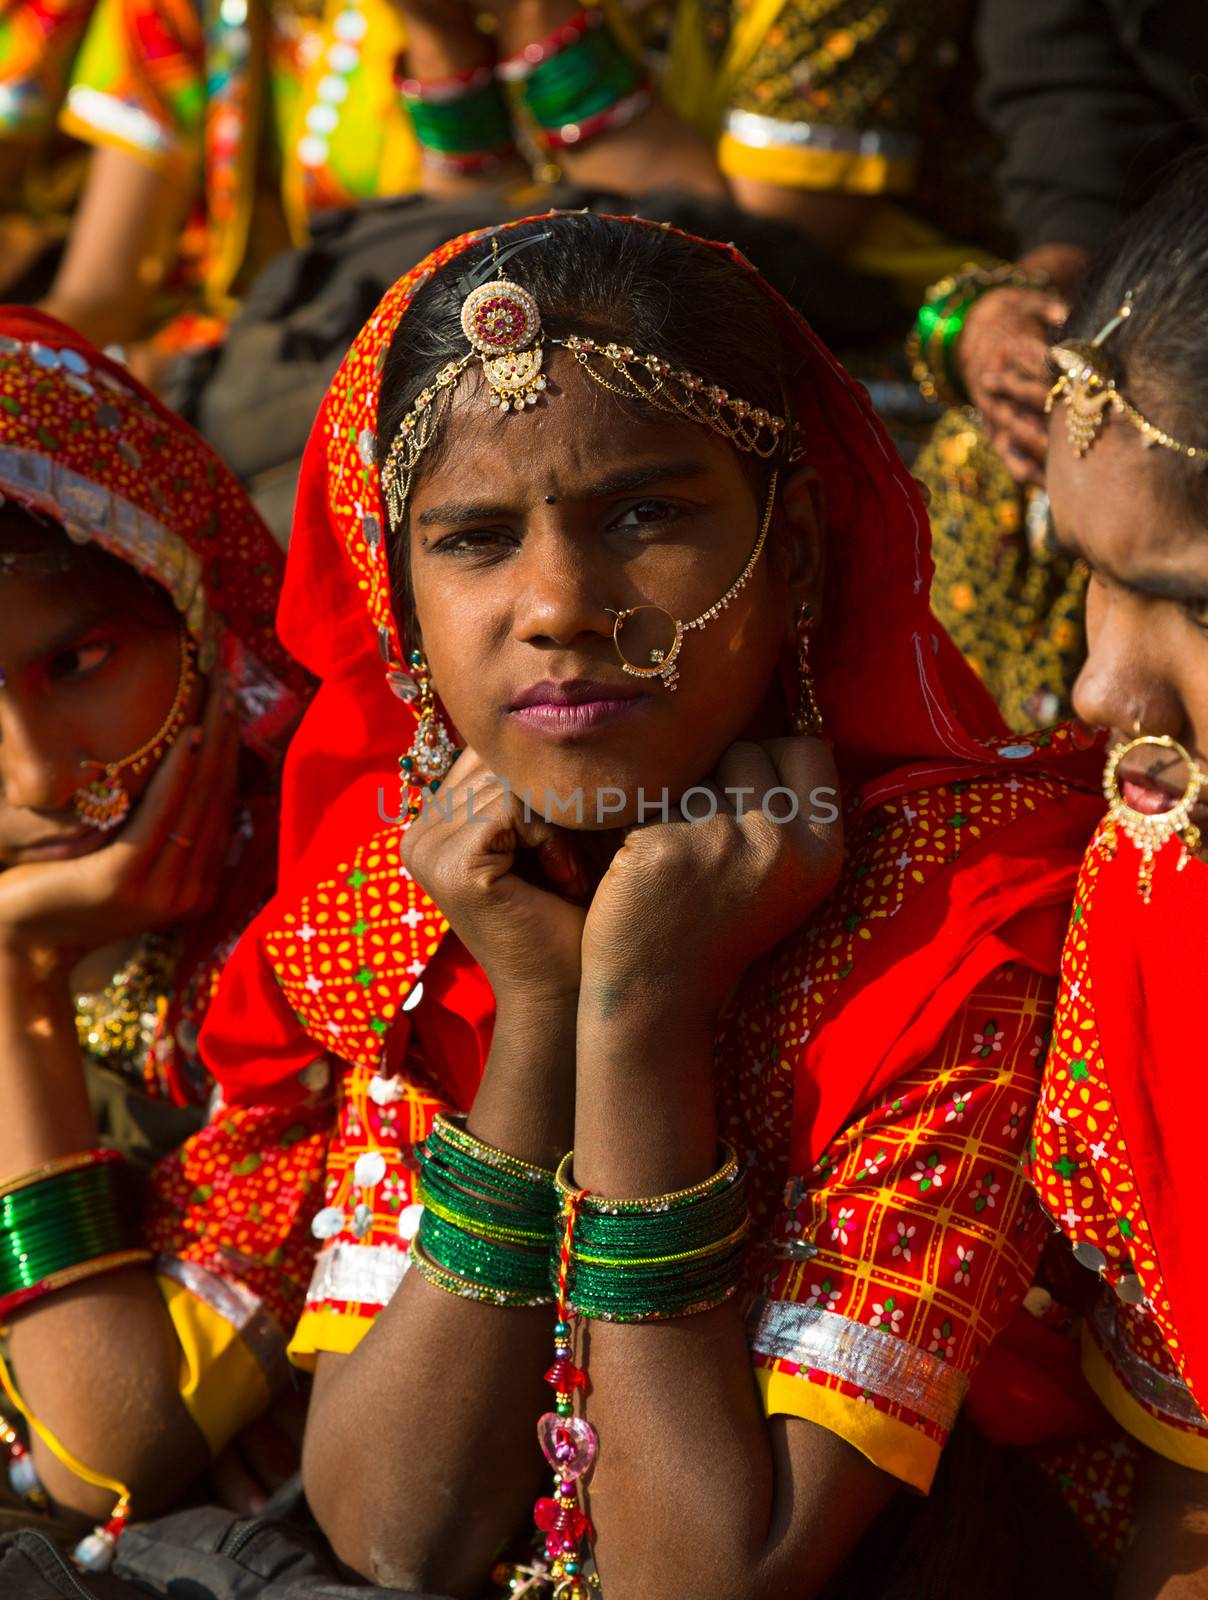 Rajasthan, India, November-21, 2012: Traditional Indian women in a rural costume looking for the camera at Pushkar camel fair, Rajasthan, India